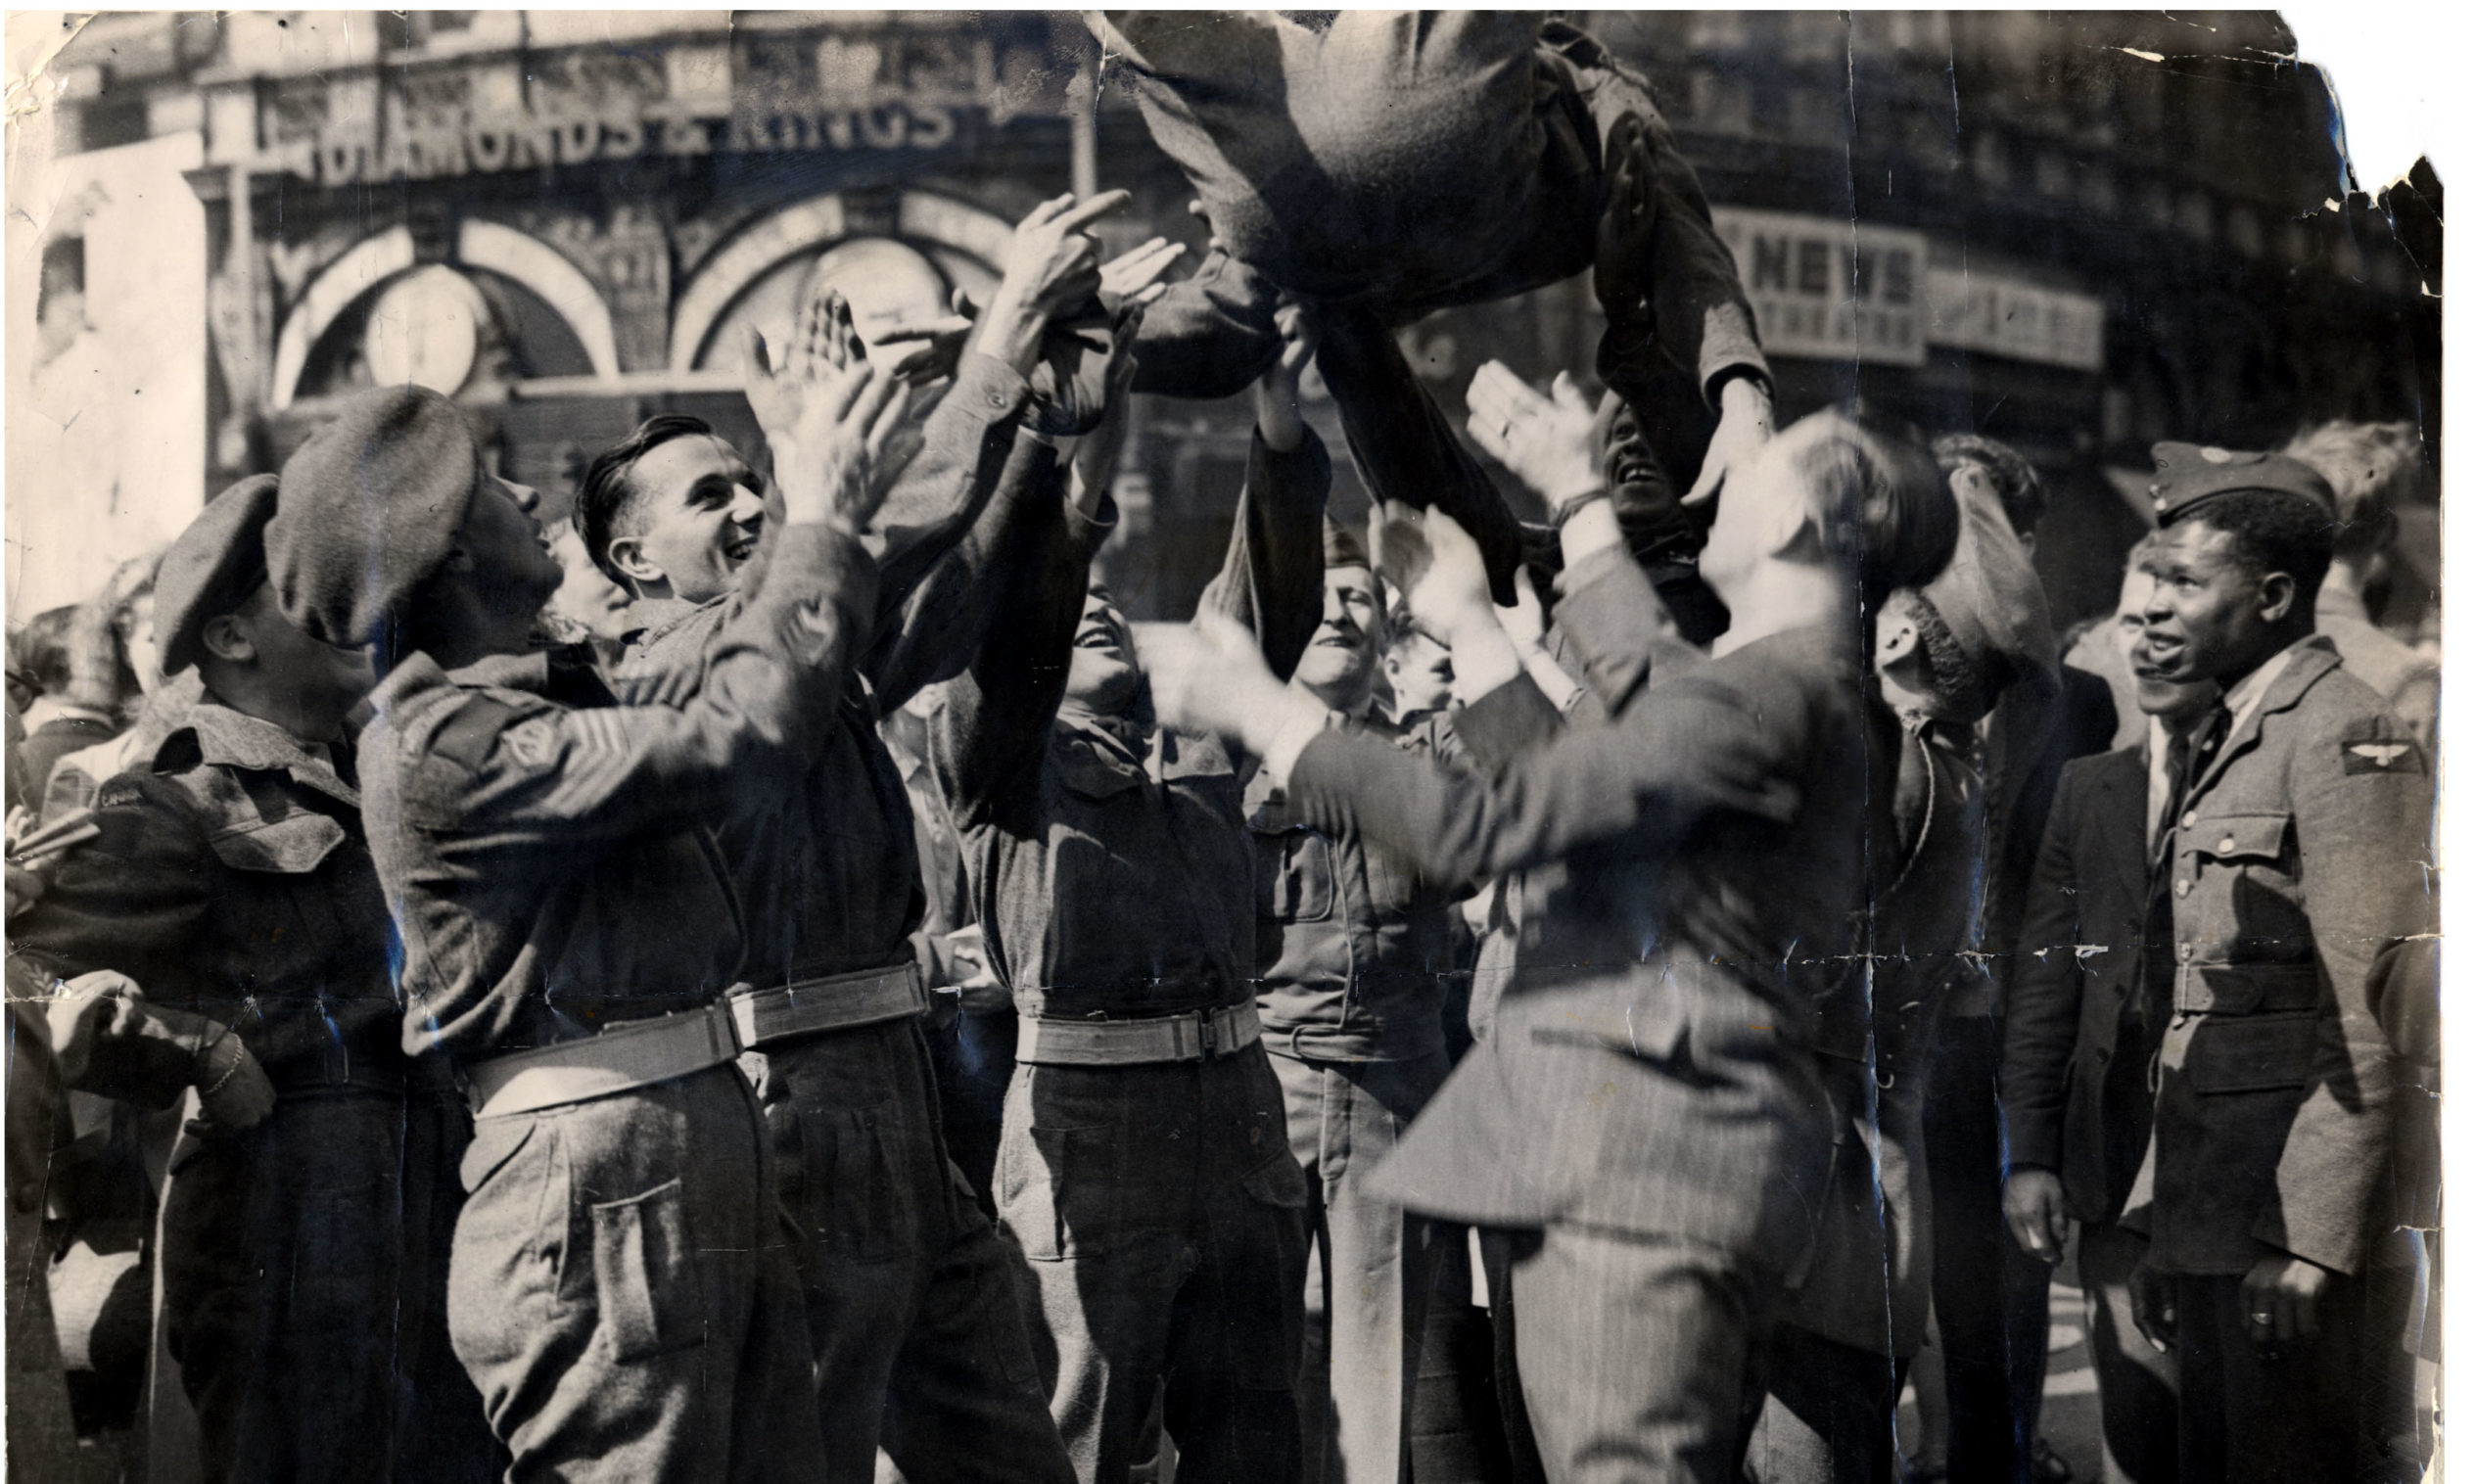 Soldiers celebrating Victory over Japan in Piccadilly Circus, London.